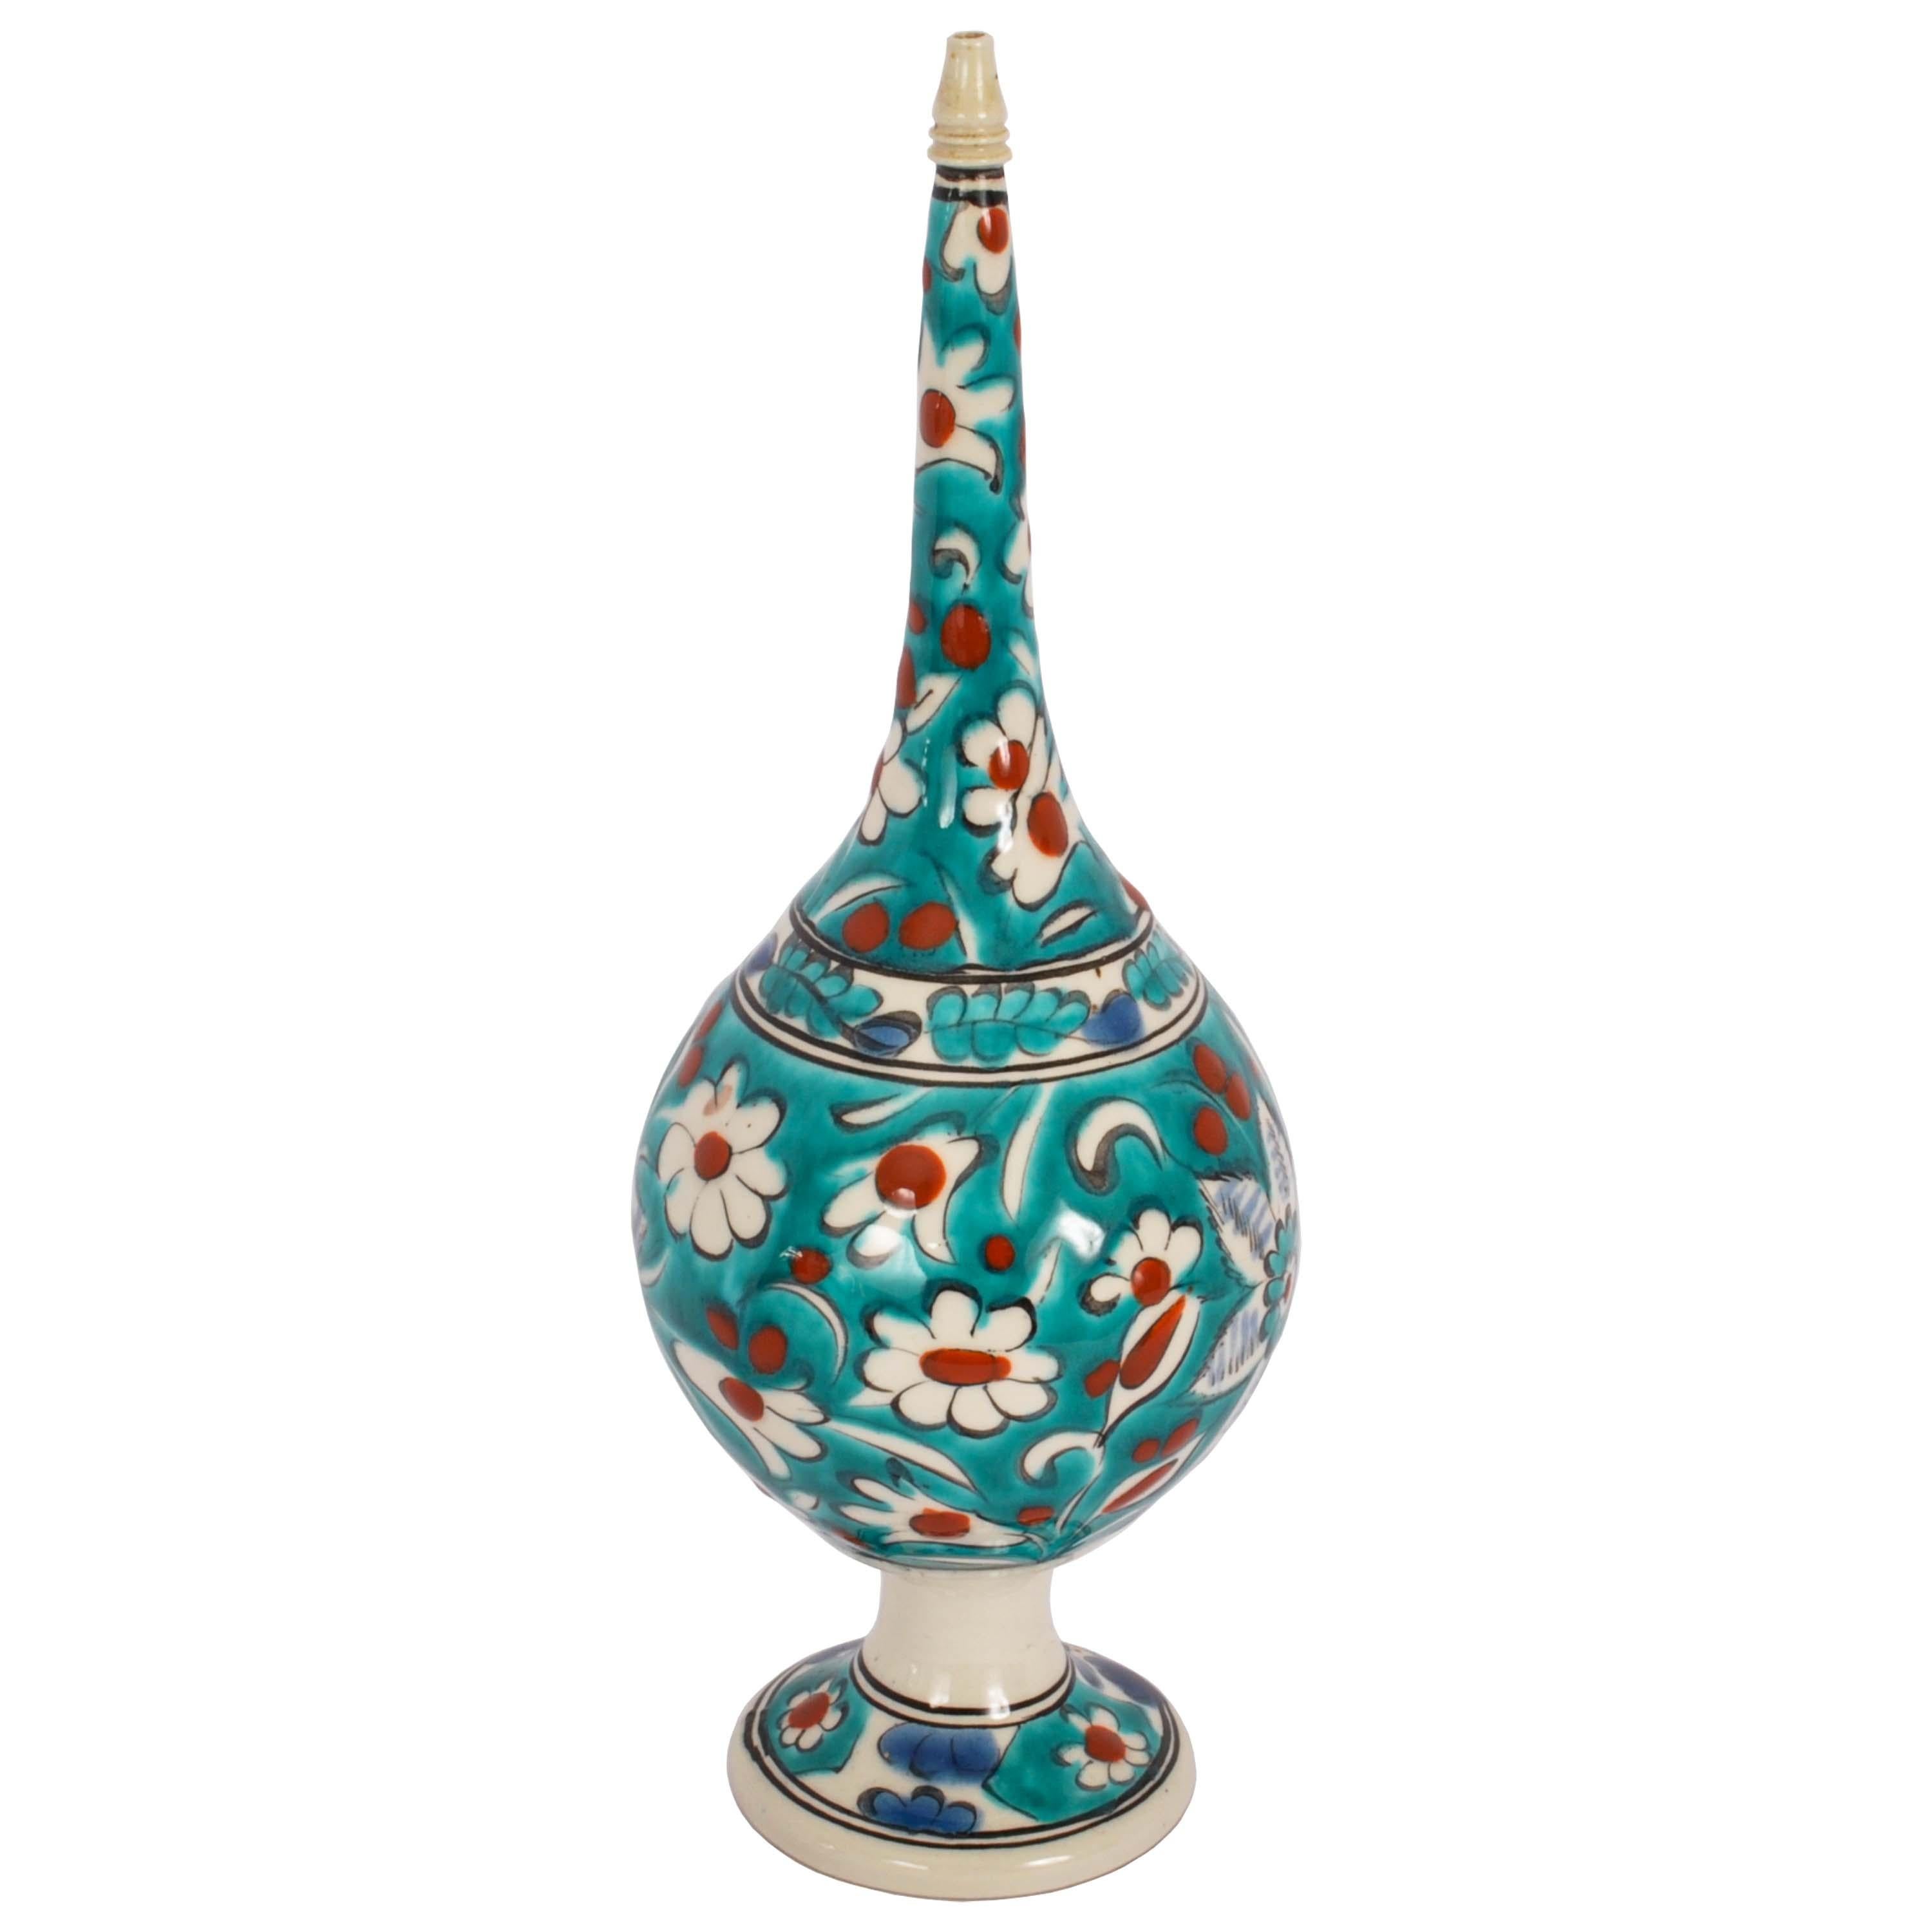 A good antique Islamic Ottoman Kutahya pottery rosewater dropper, Turkey, circa 1900.
The rosewater dropper of globular form with a tall tapering neck and raised on a flared foot, decorated with vibrant floral decoration on a turquoise